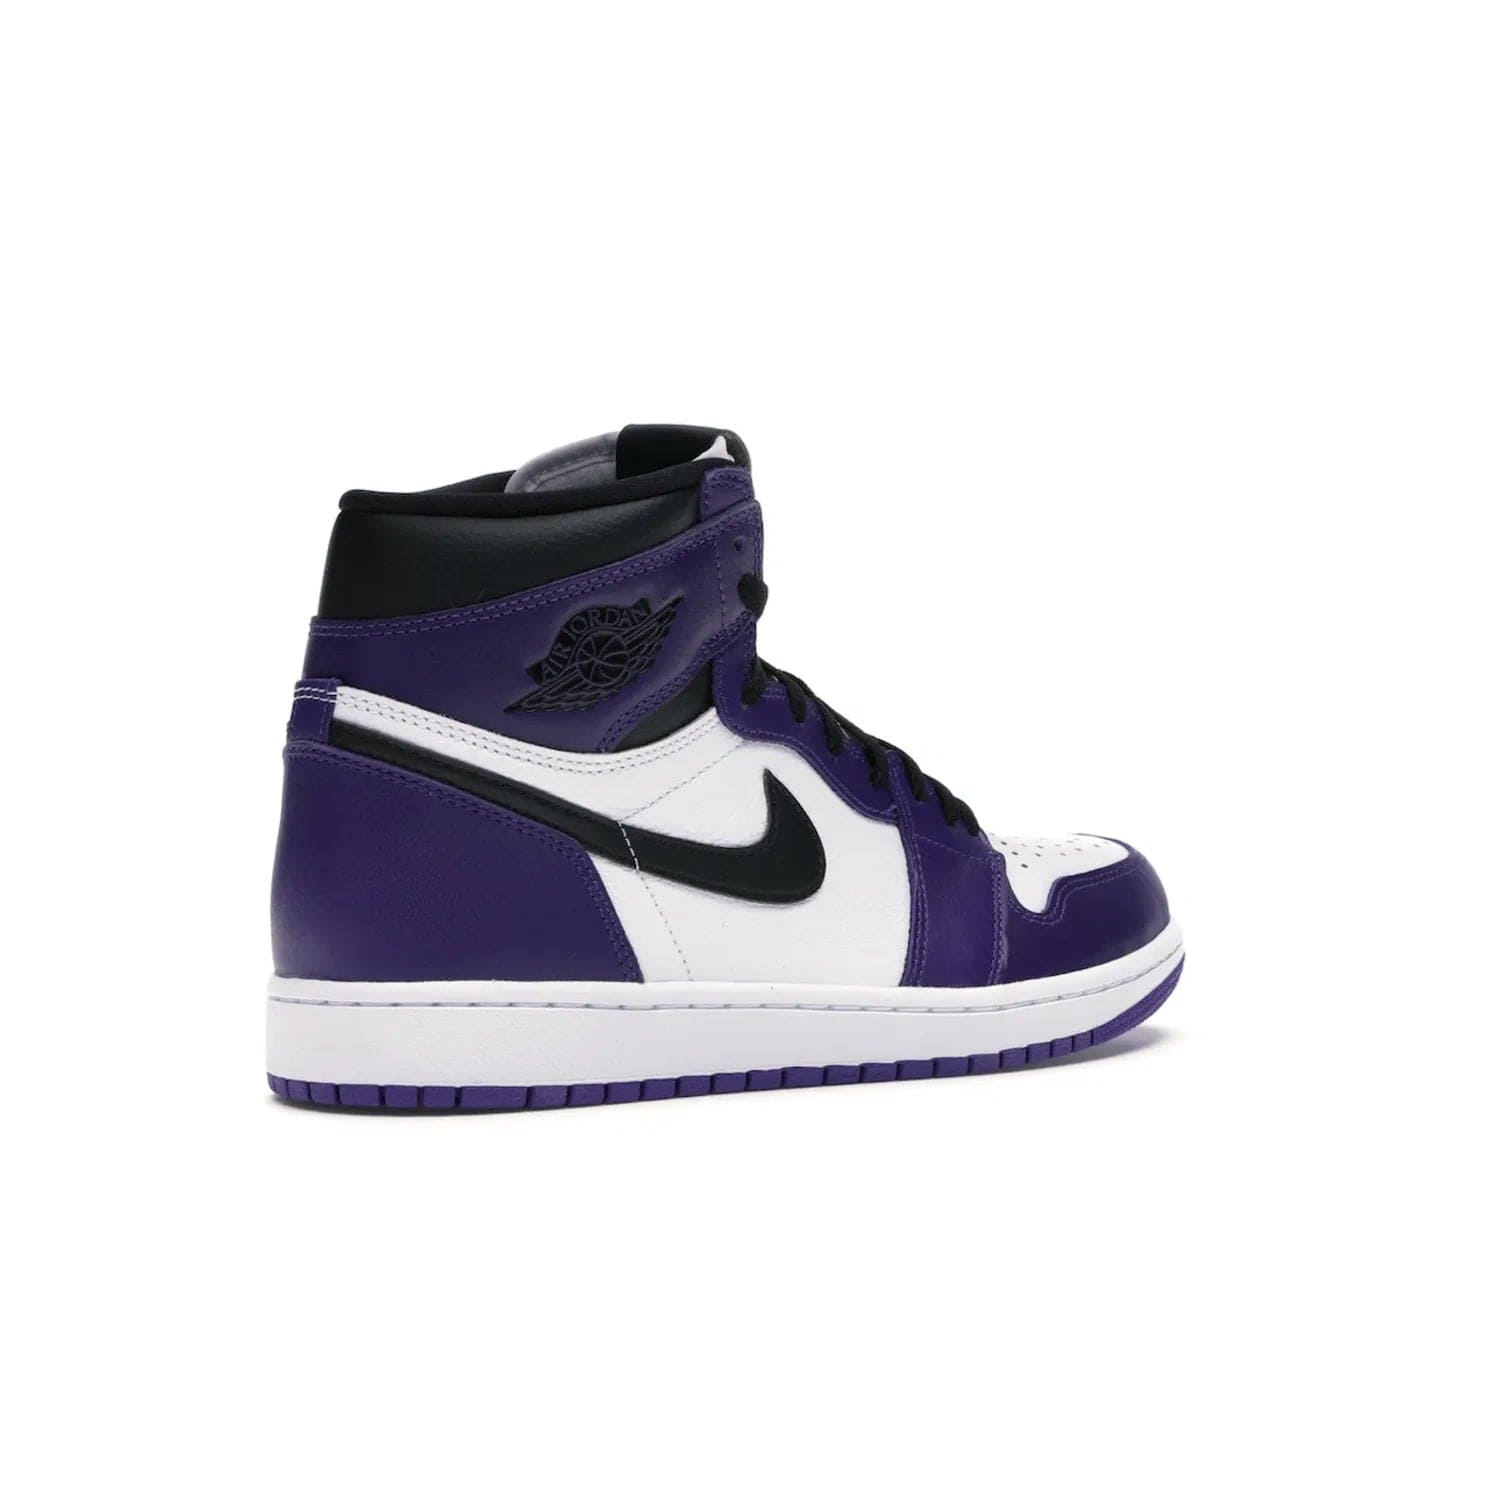 Jordan 1 Retro High Court Purple White - Image 33 - Only at www.BallersClubKickz.com - Grab the classic Jordan 1 Retro High Court Purple White and add major flavor to your collection. White leather upper with Court Purple overlays and Swoosh logo. White midsole and purple outsole. Get yours and rep your Jordan Brand.